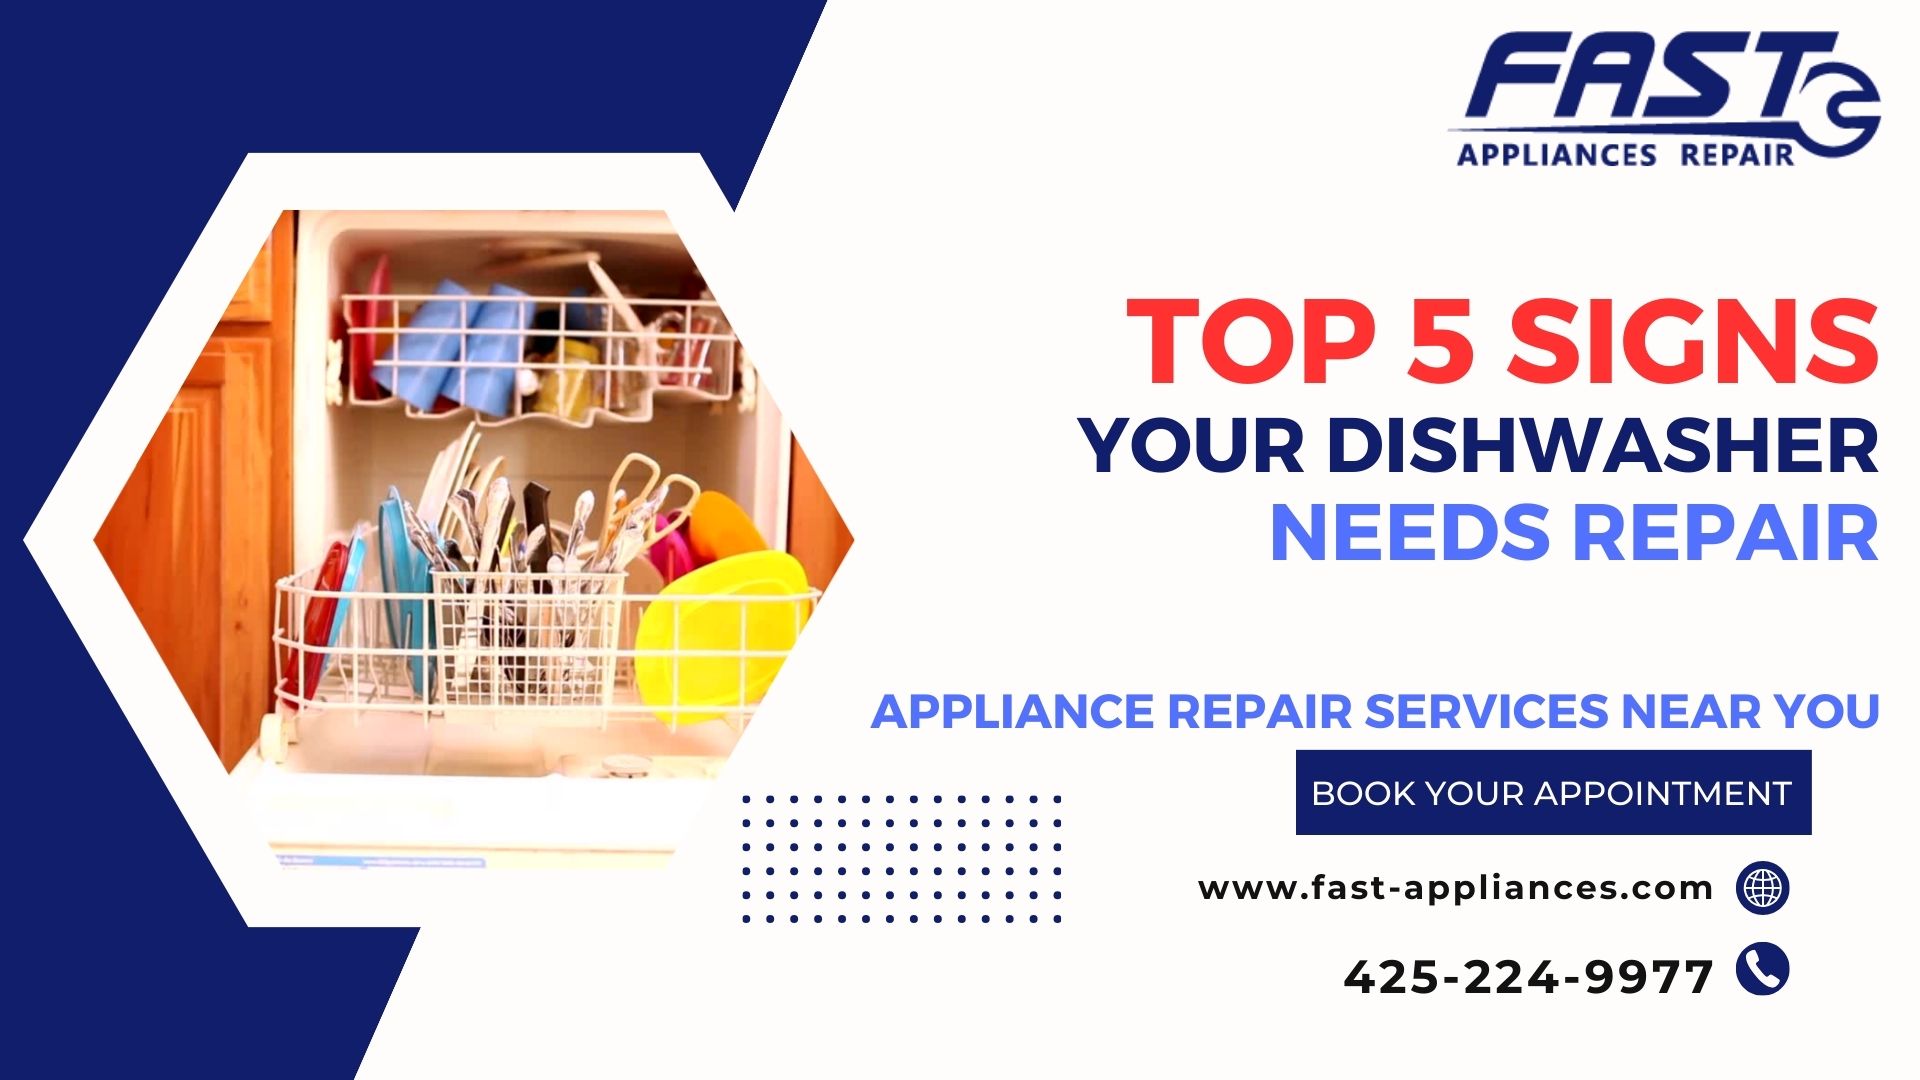 Top 5 Signs Your Dishwasher Needs Repair